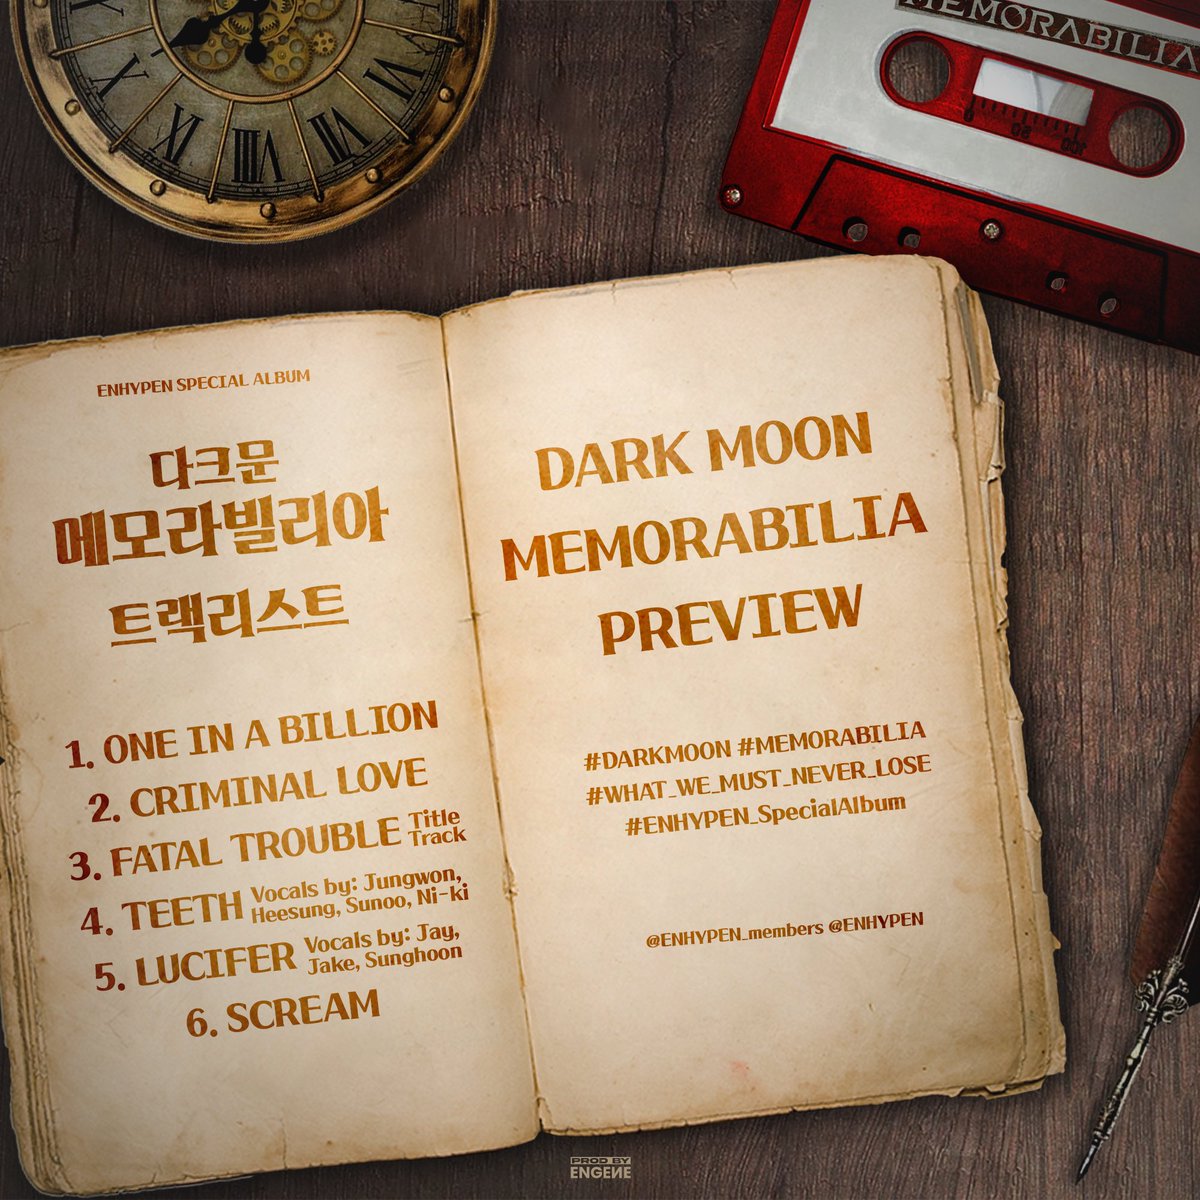 The Dark Moon will casts its enchanting glow, once again, unveiling this time the haunting preview of the nocturnal symphony. ⚔️🎶 Are you prepared to be spellbound? DARK MOON MEMORABILIA PREVIEW #DARKMOON #MEMORABILIA #ENHYPEN_SpecialAlbum #WHAT_WE_MUST_NEVER_LOSE #다크문…